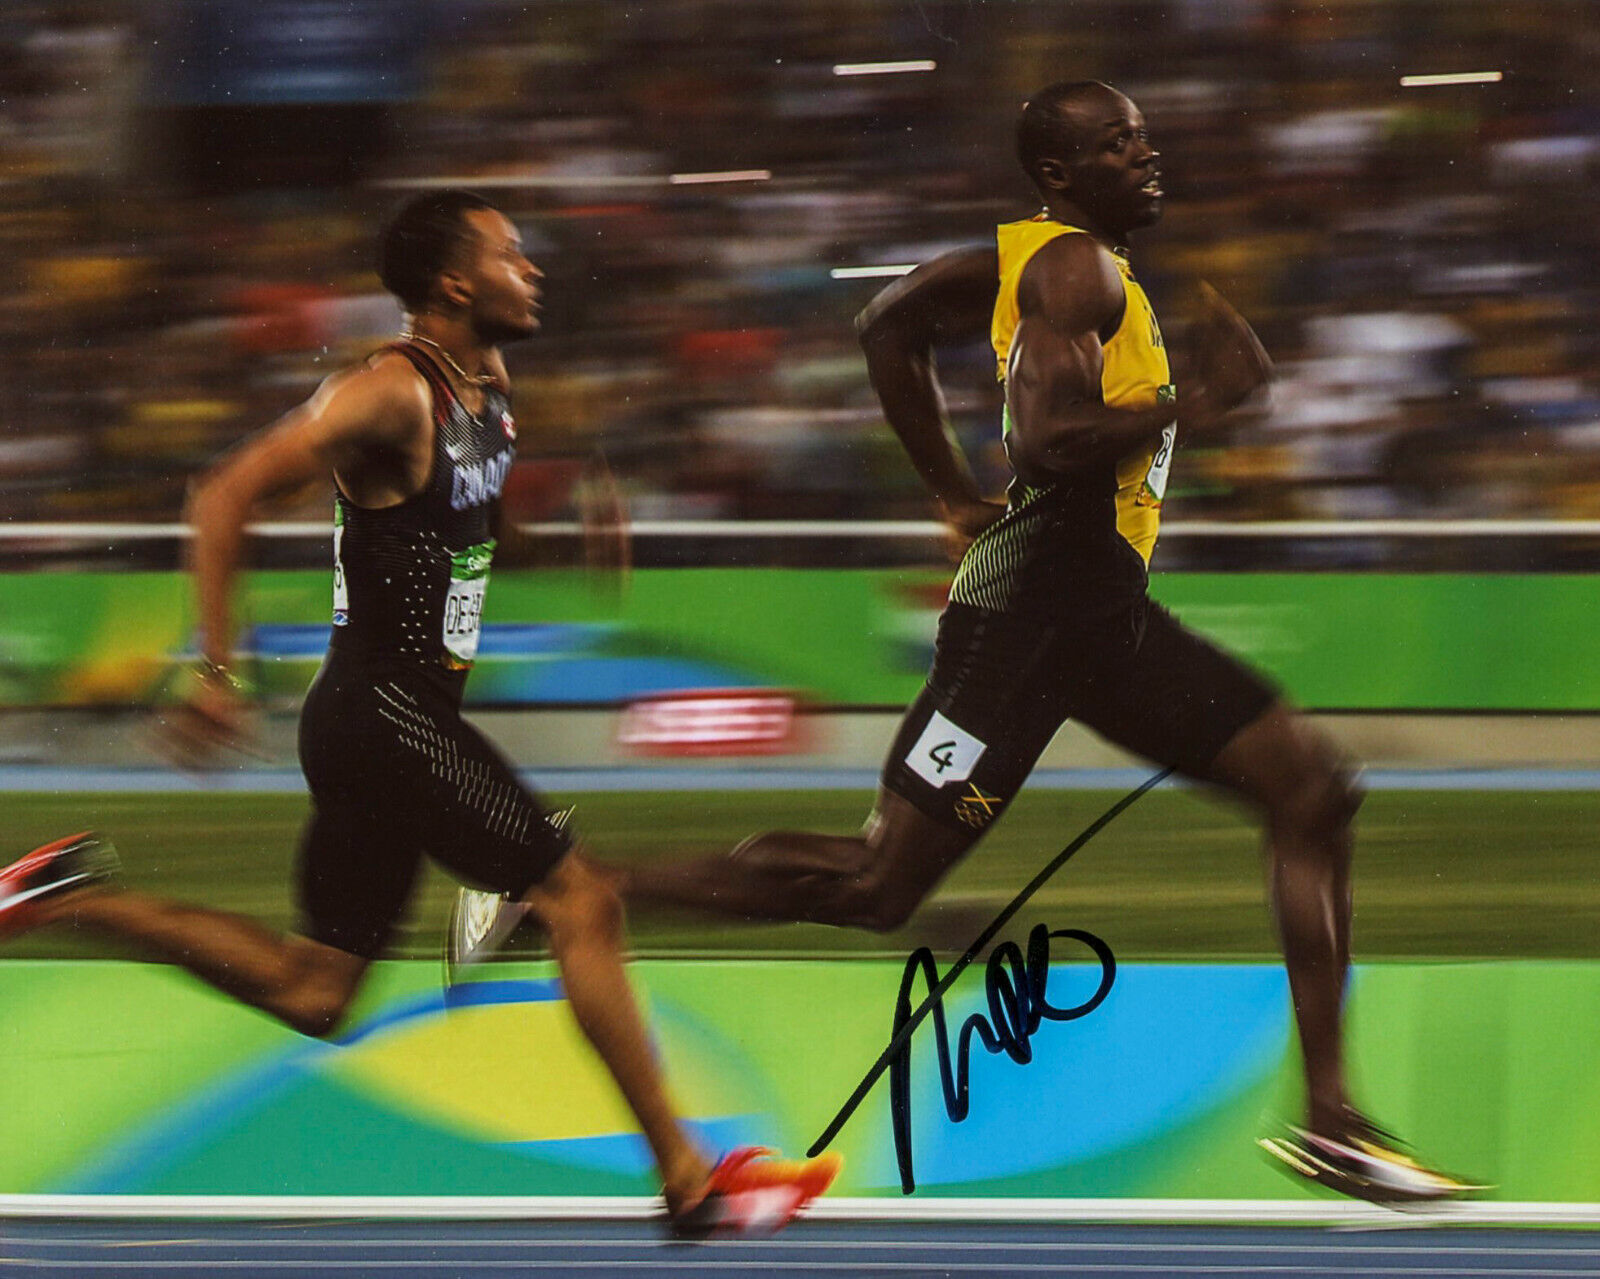 CANADA 100M SPRINTER ANDRE DE GRASSE SIGNED 8x10 Photo Poster painting #2 TOKYO 2020 OLYMPICS